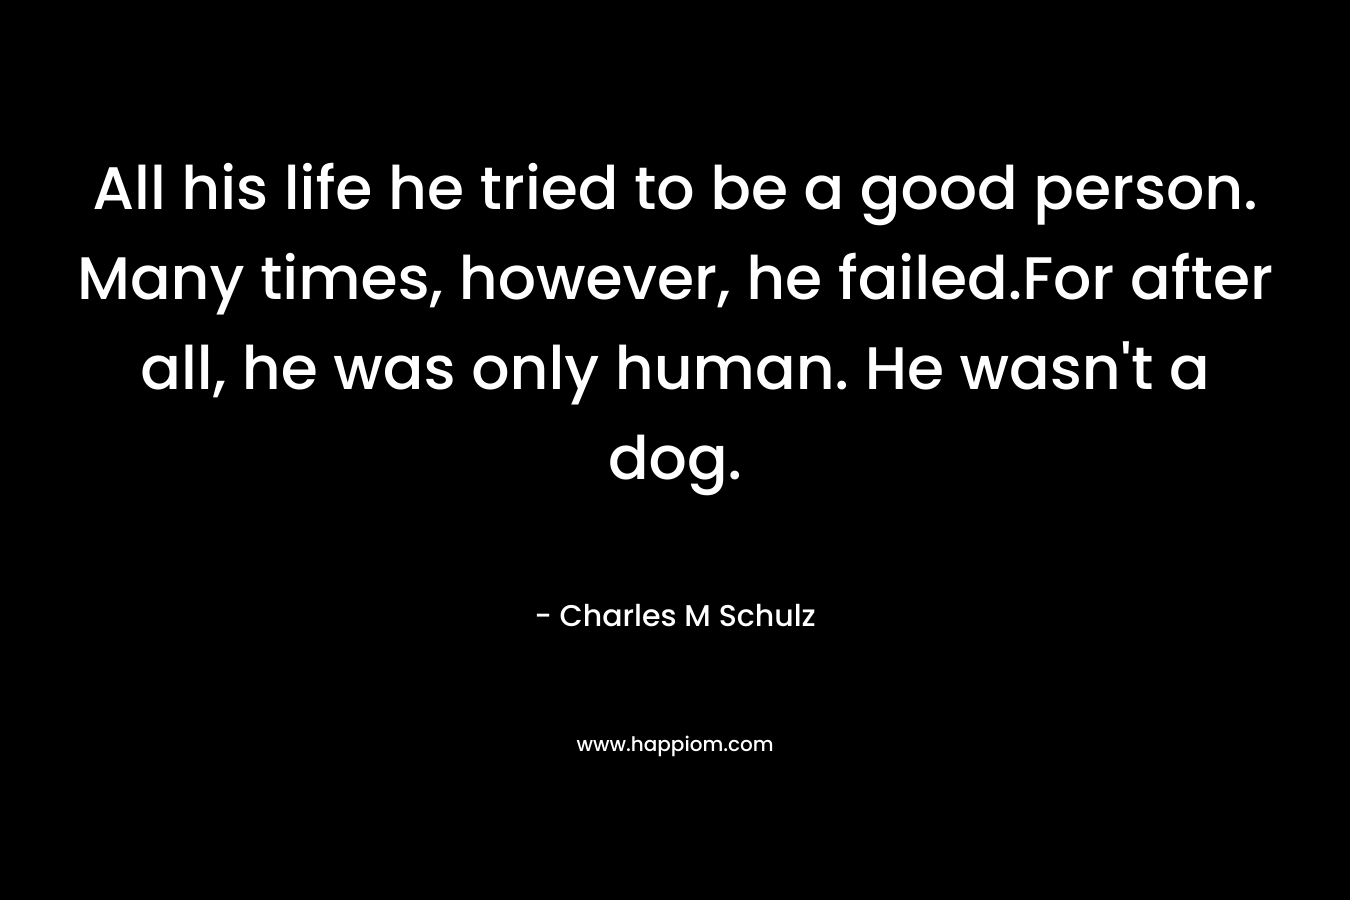 All his life he tried to be a good person. Many times, however, he failed.For after all, he was only human. He wasn’t a dog. – Charles M Schulz